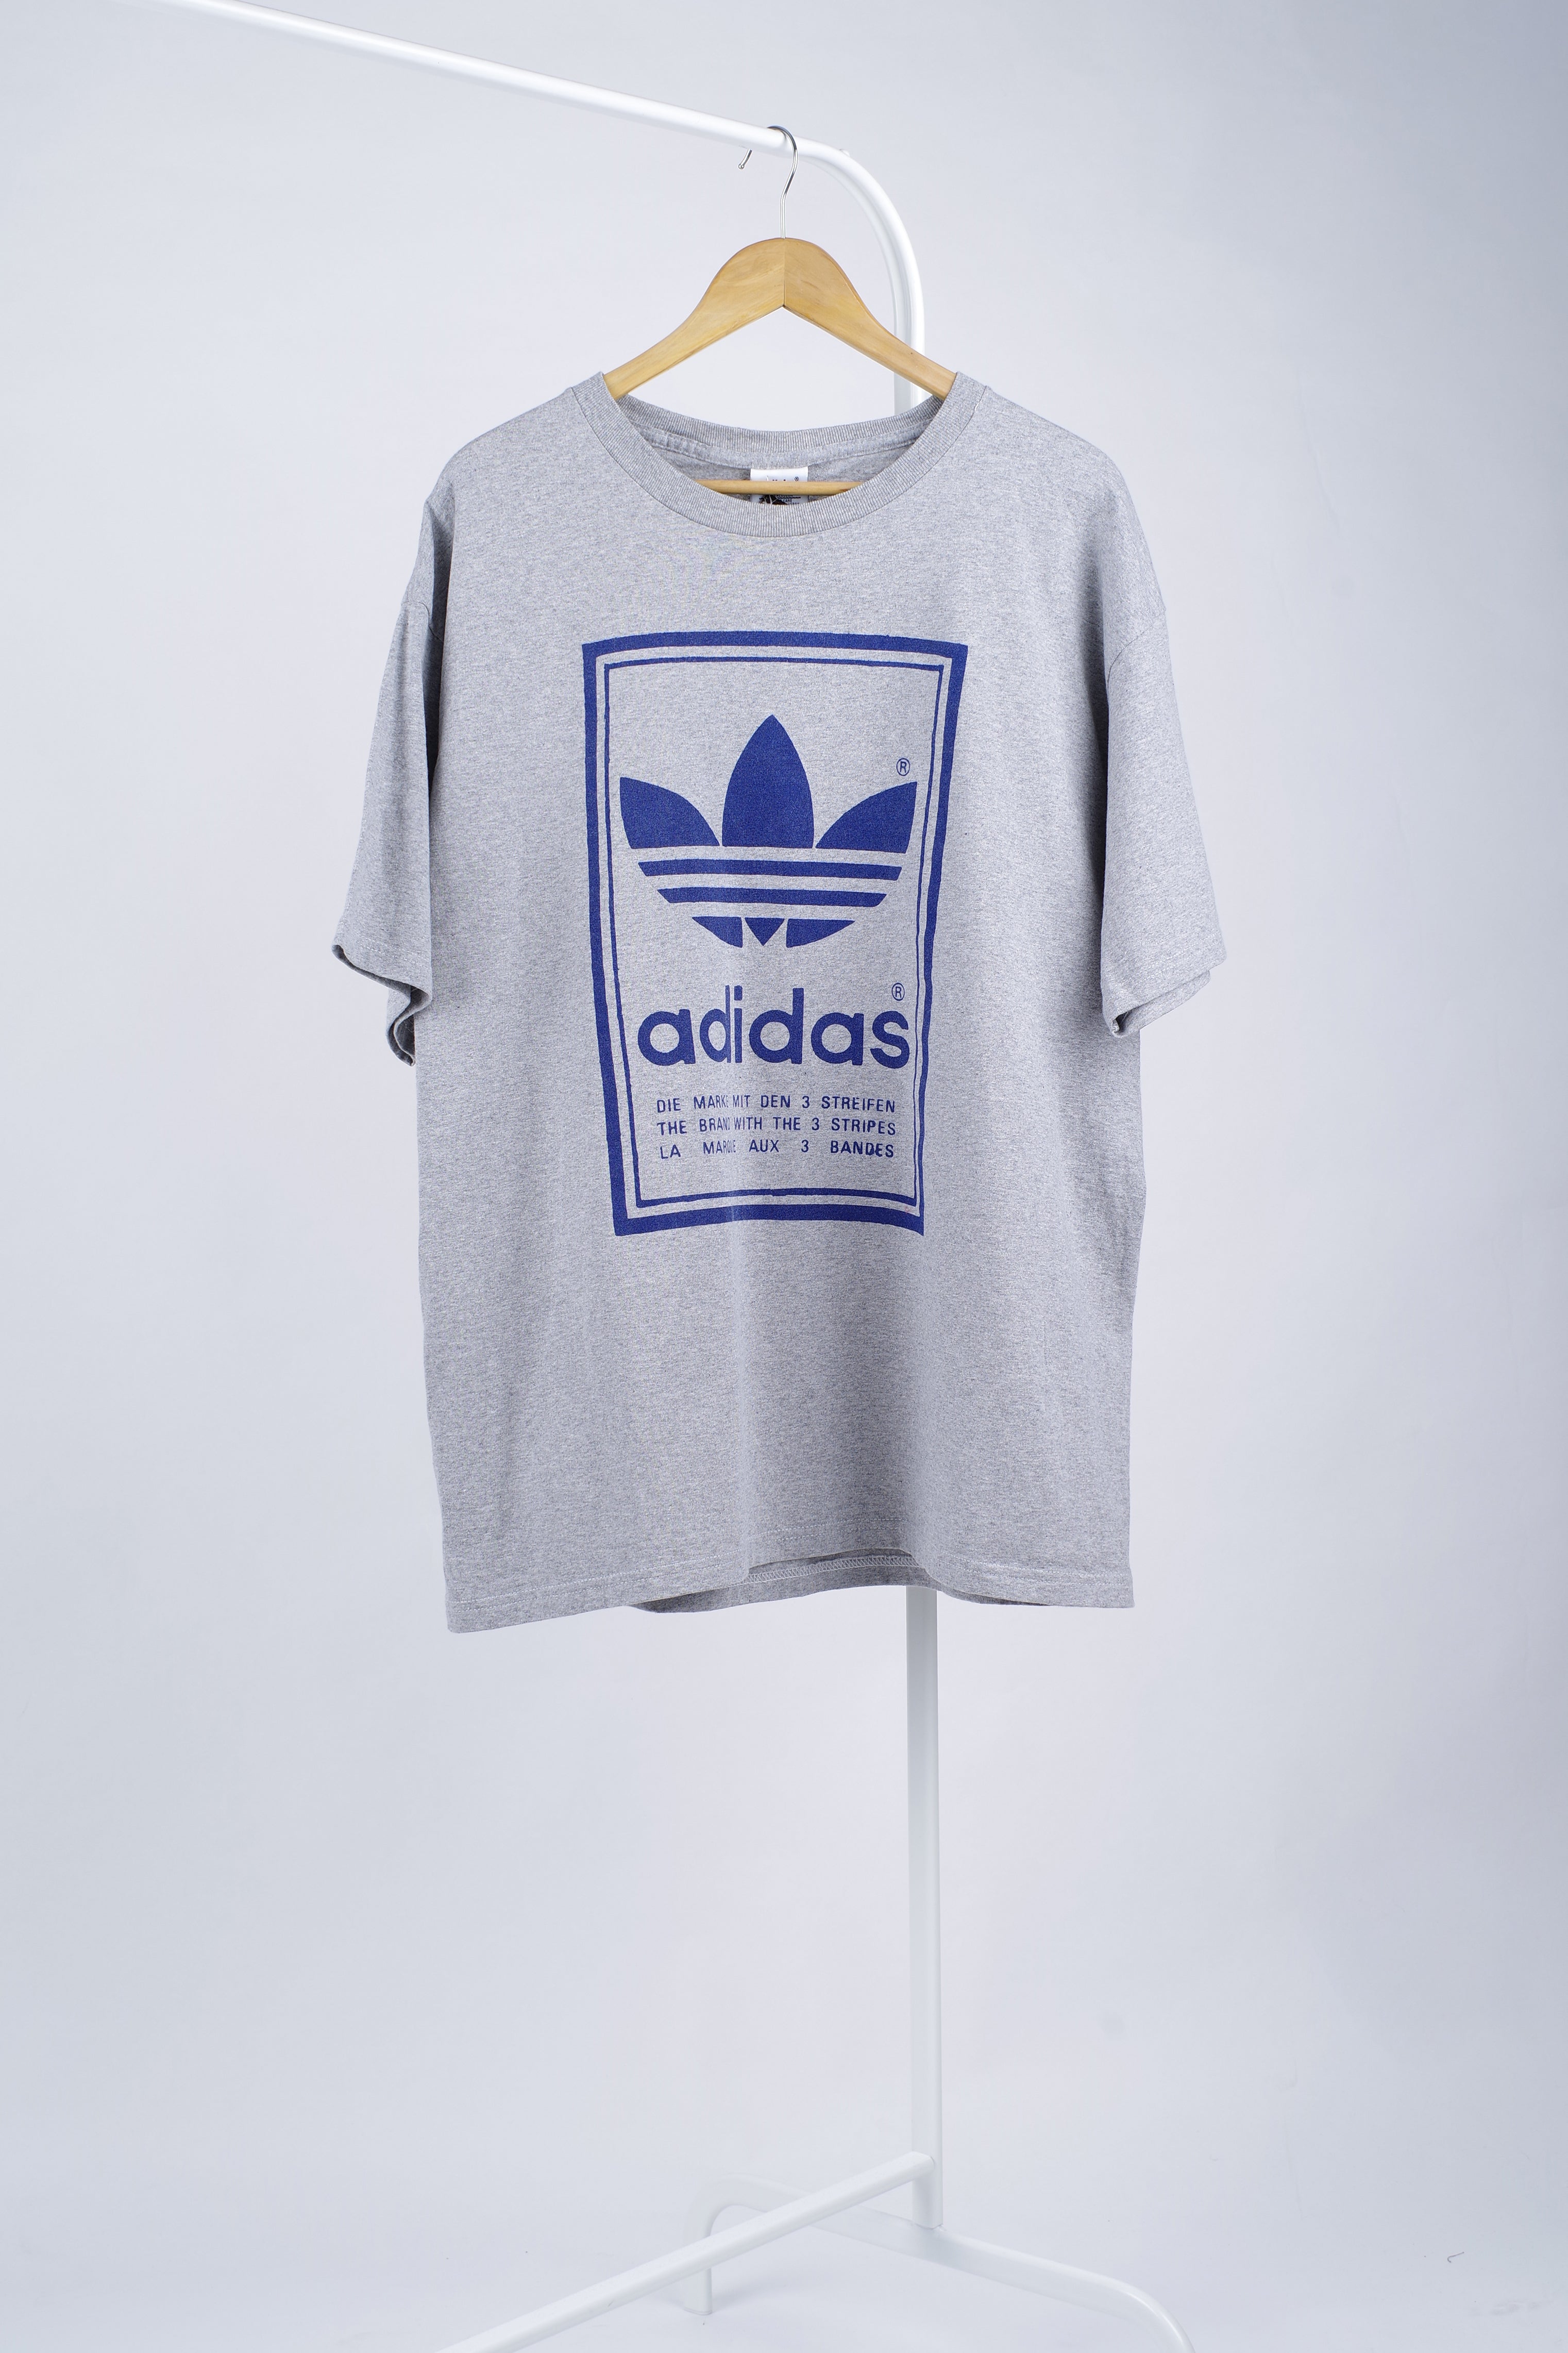 Made in USA Adidas Originals Gray T-shirt, Size men's L – SecondFirst